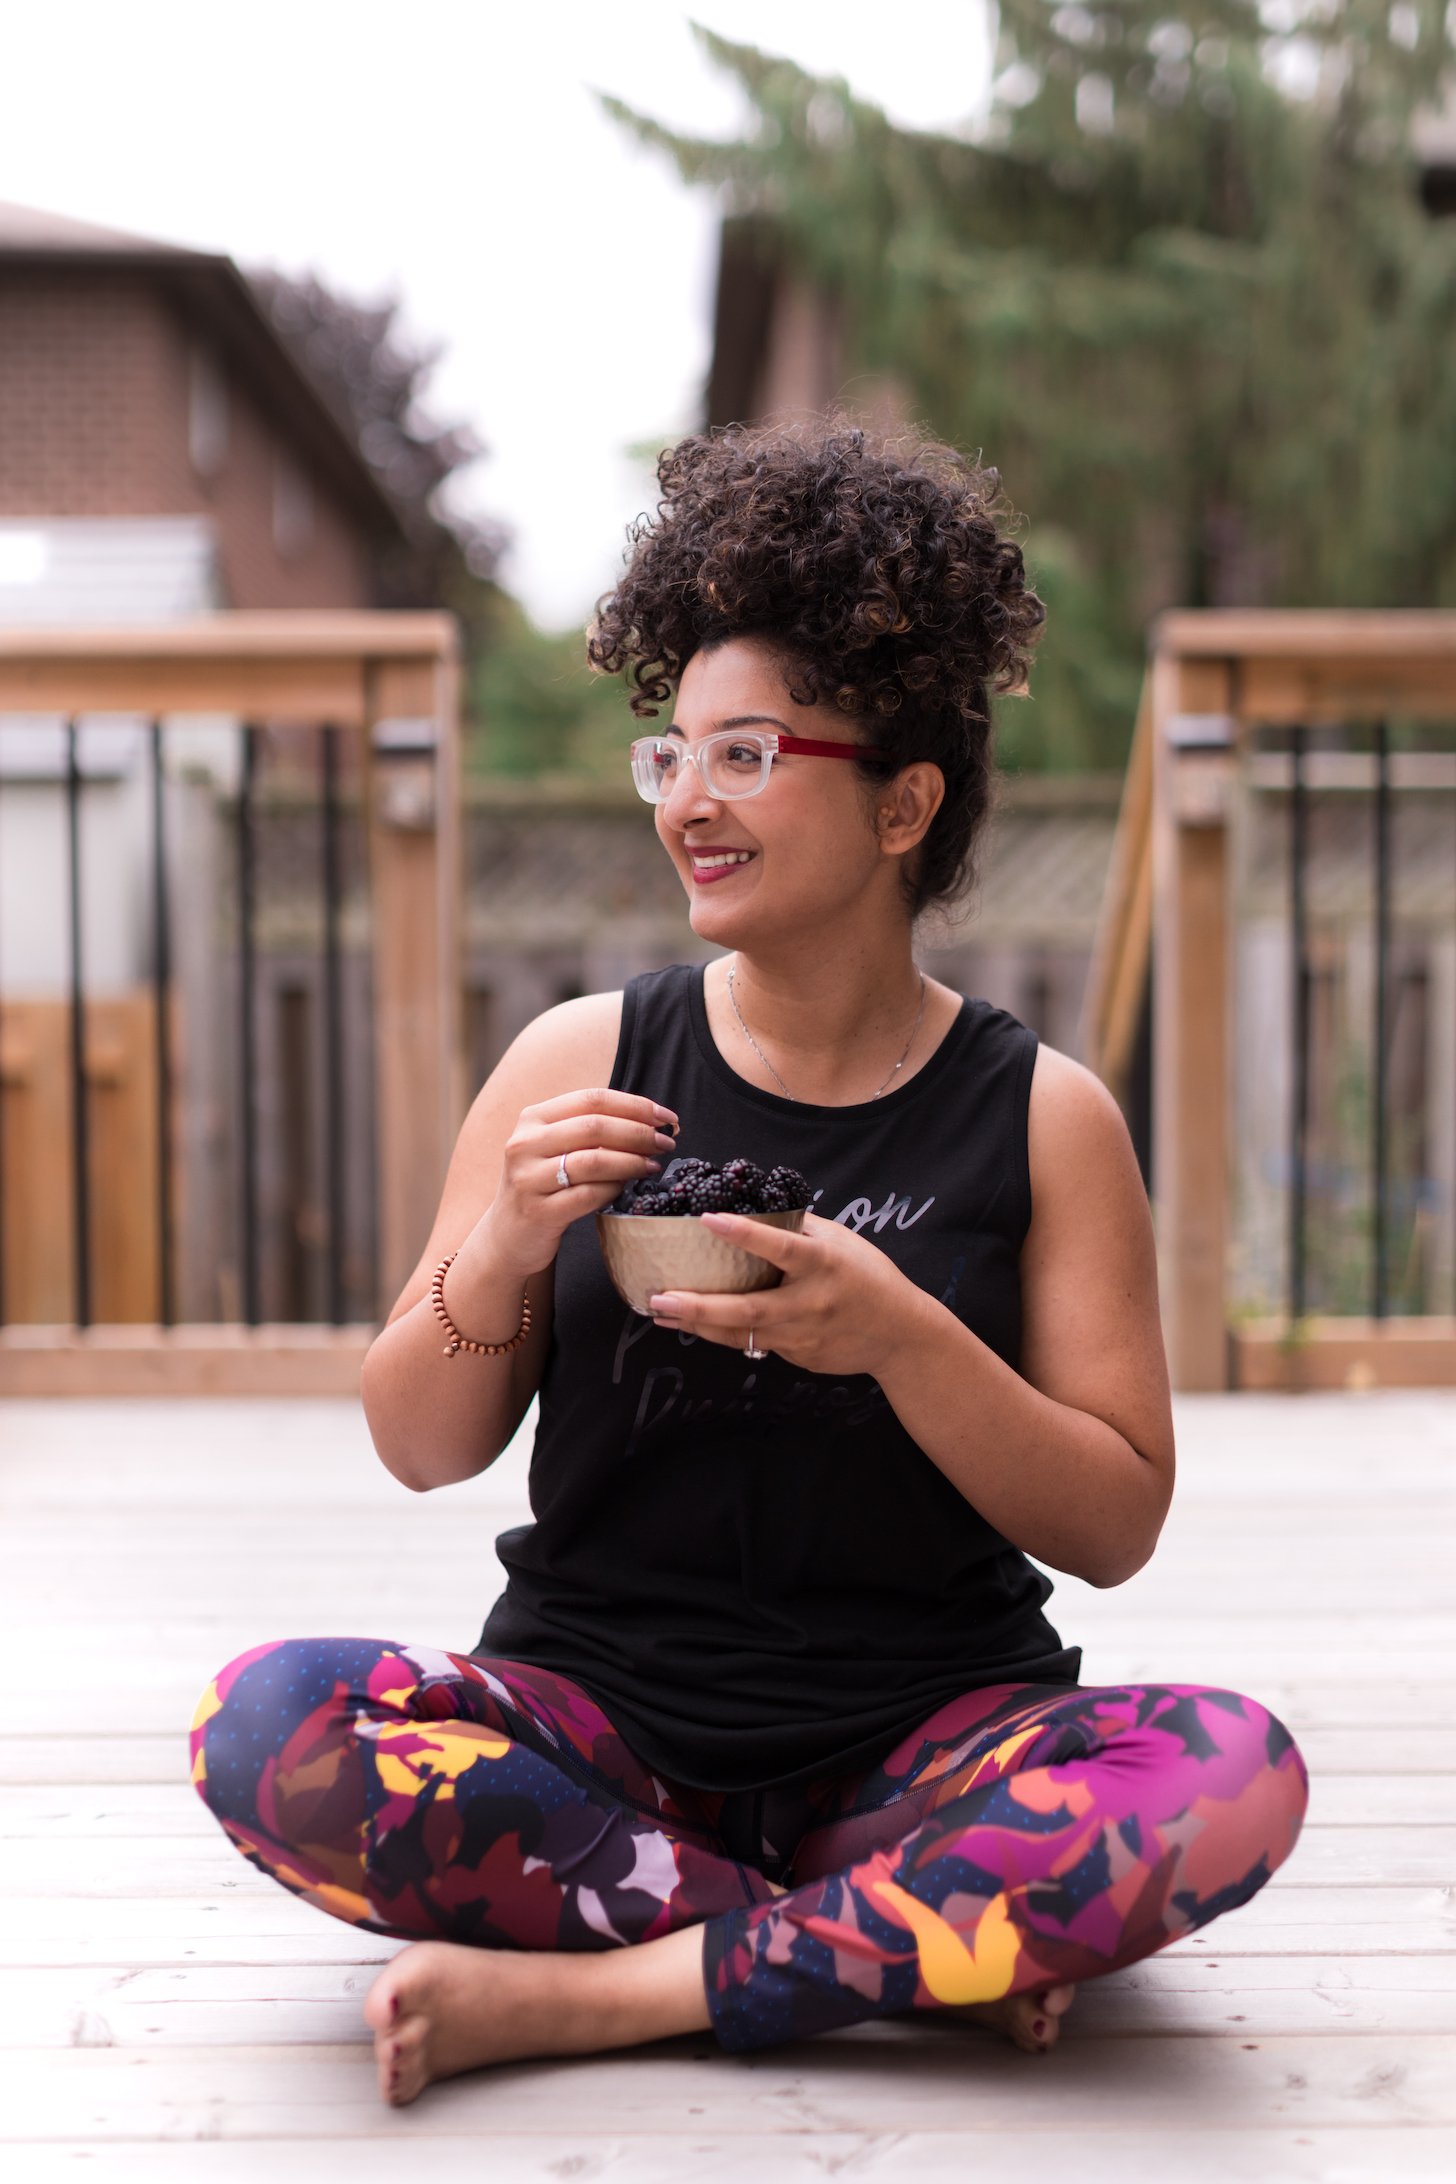 a lady sitting in a yoga position on a wooden deck outside holding a bowl of berries.